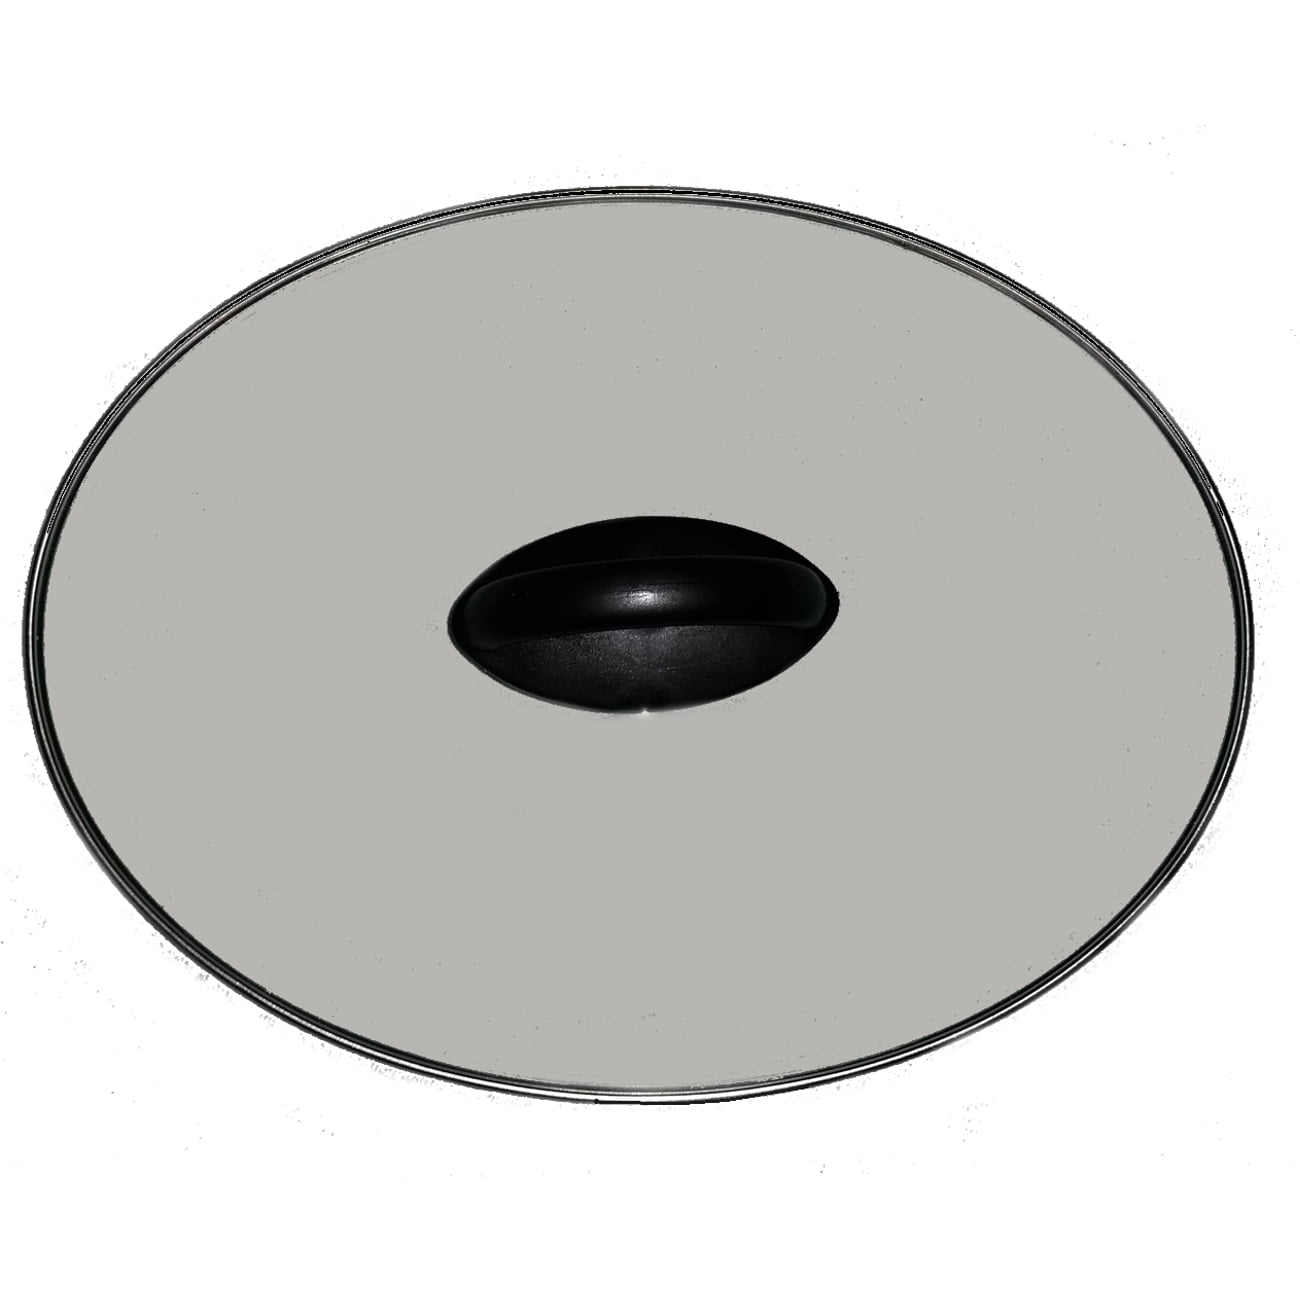 Rival 3735-WN Crock Pot Oval Glass Lid Replacement-12388$A